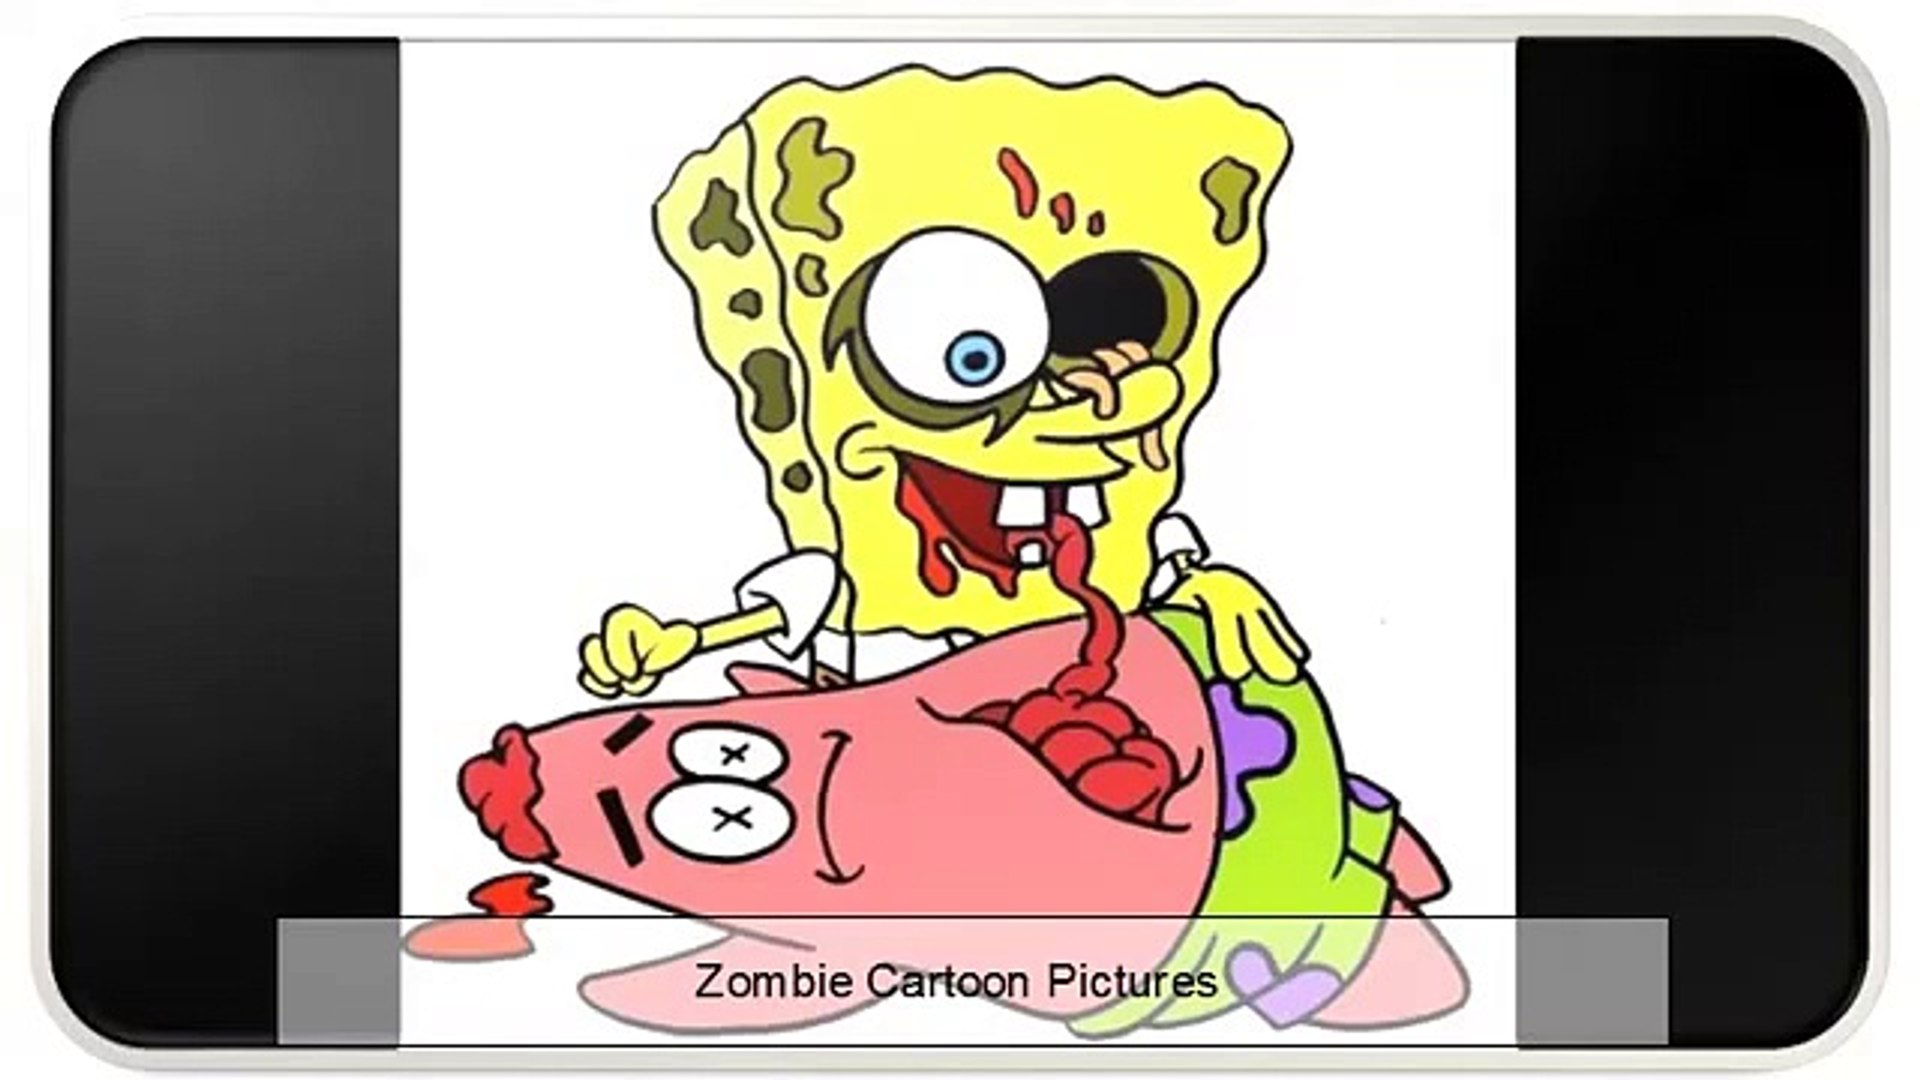 Cartoon Zombie Stock Photos and Images - video Dailymotion